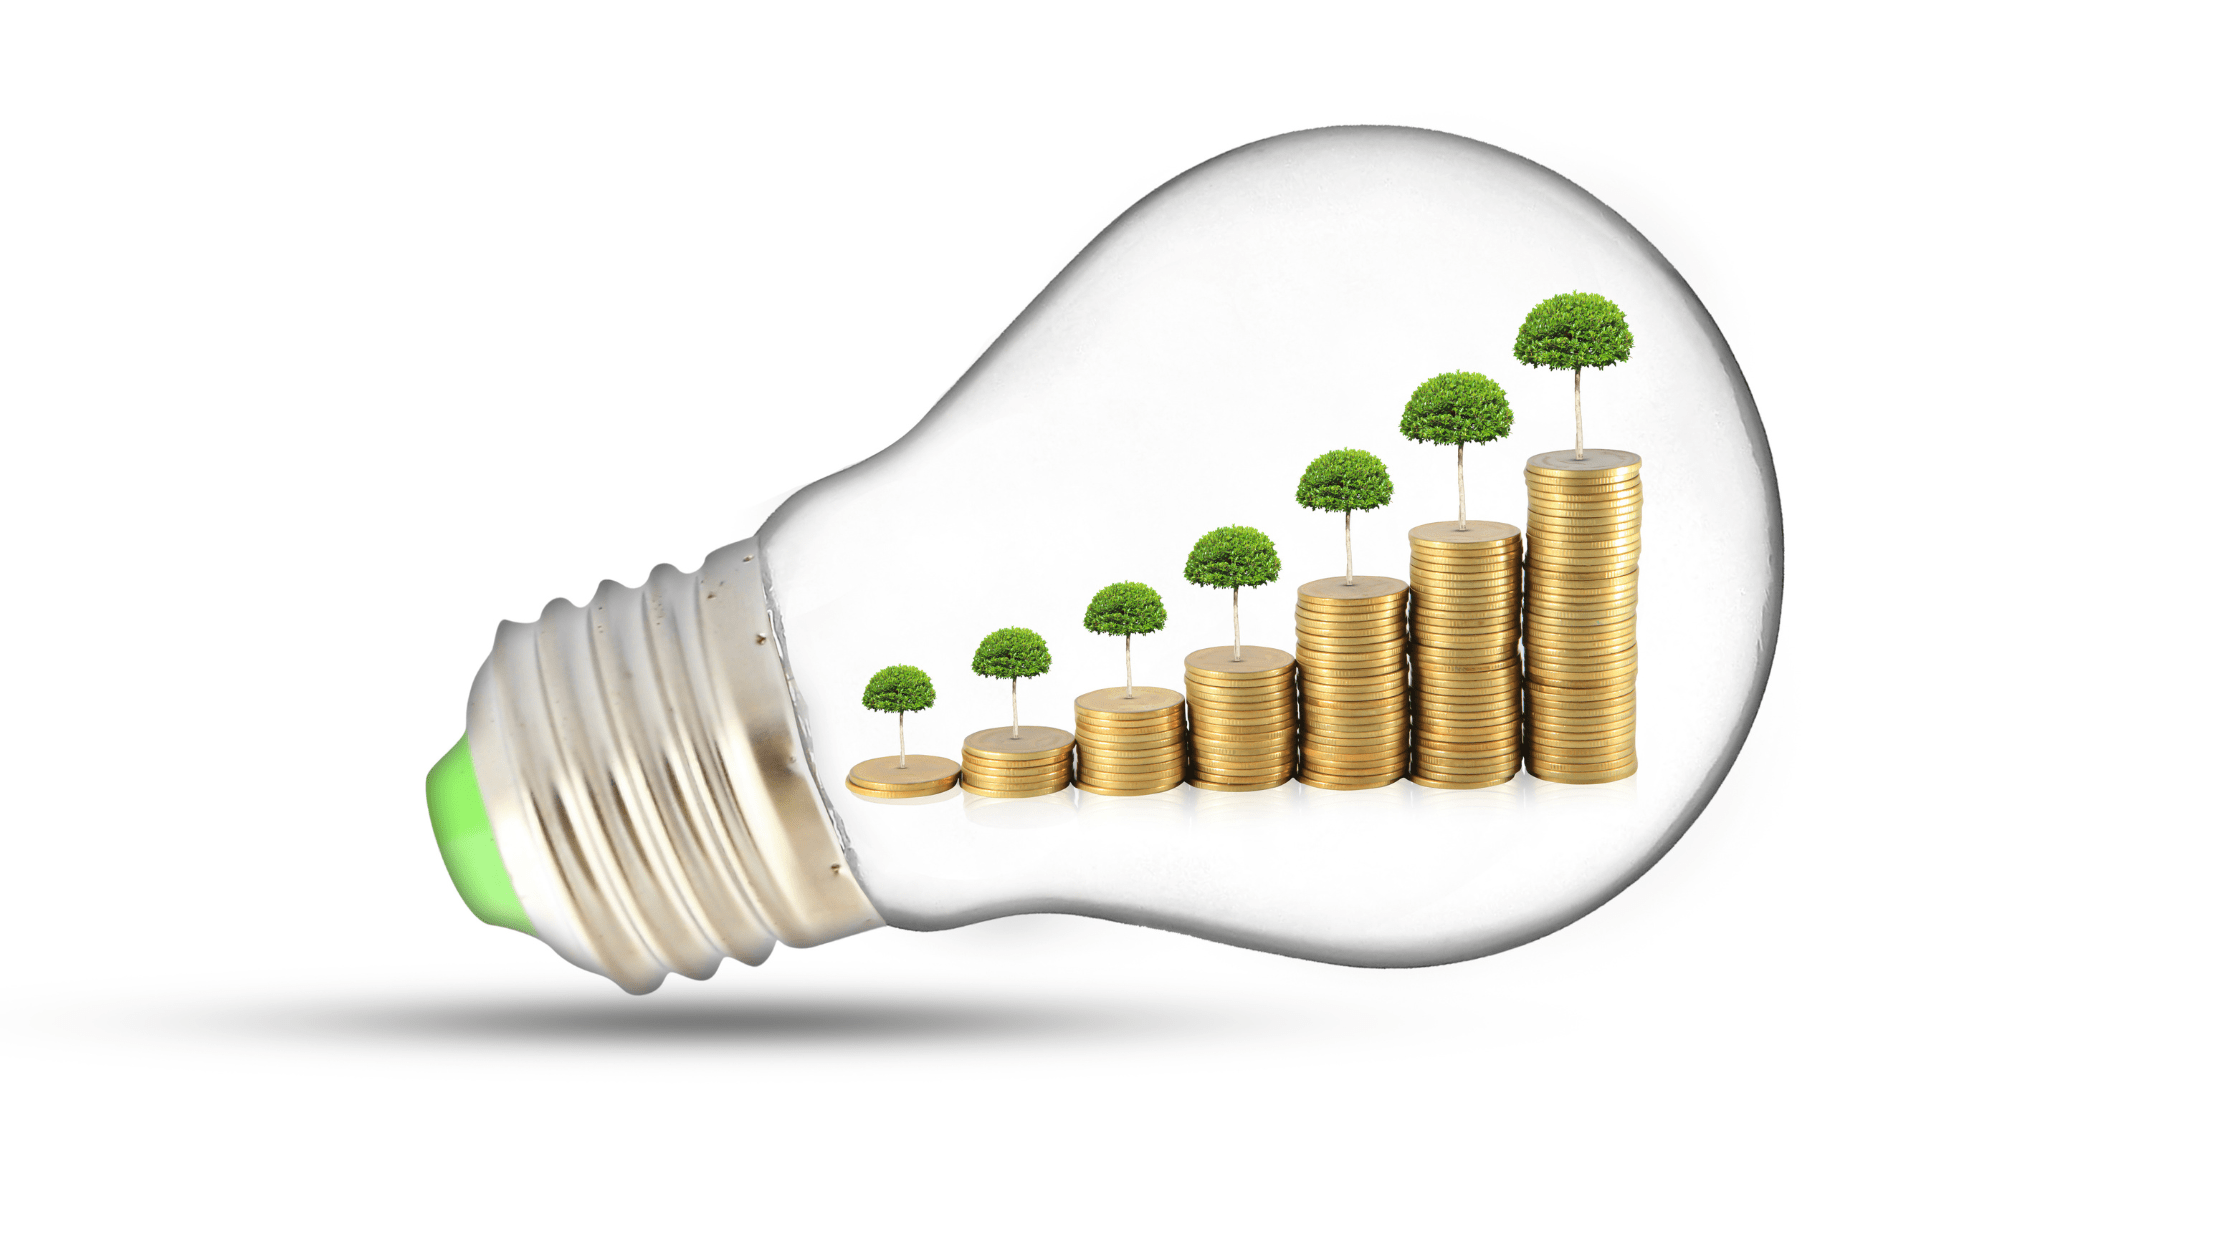 Lightbulb filled with growing piles of money and trees